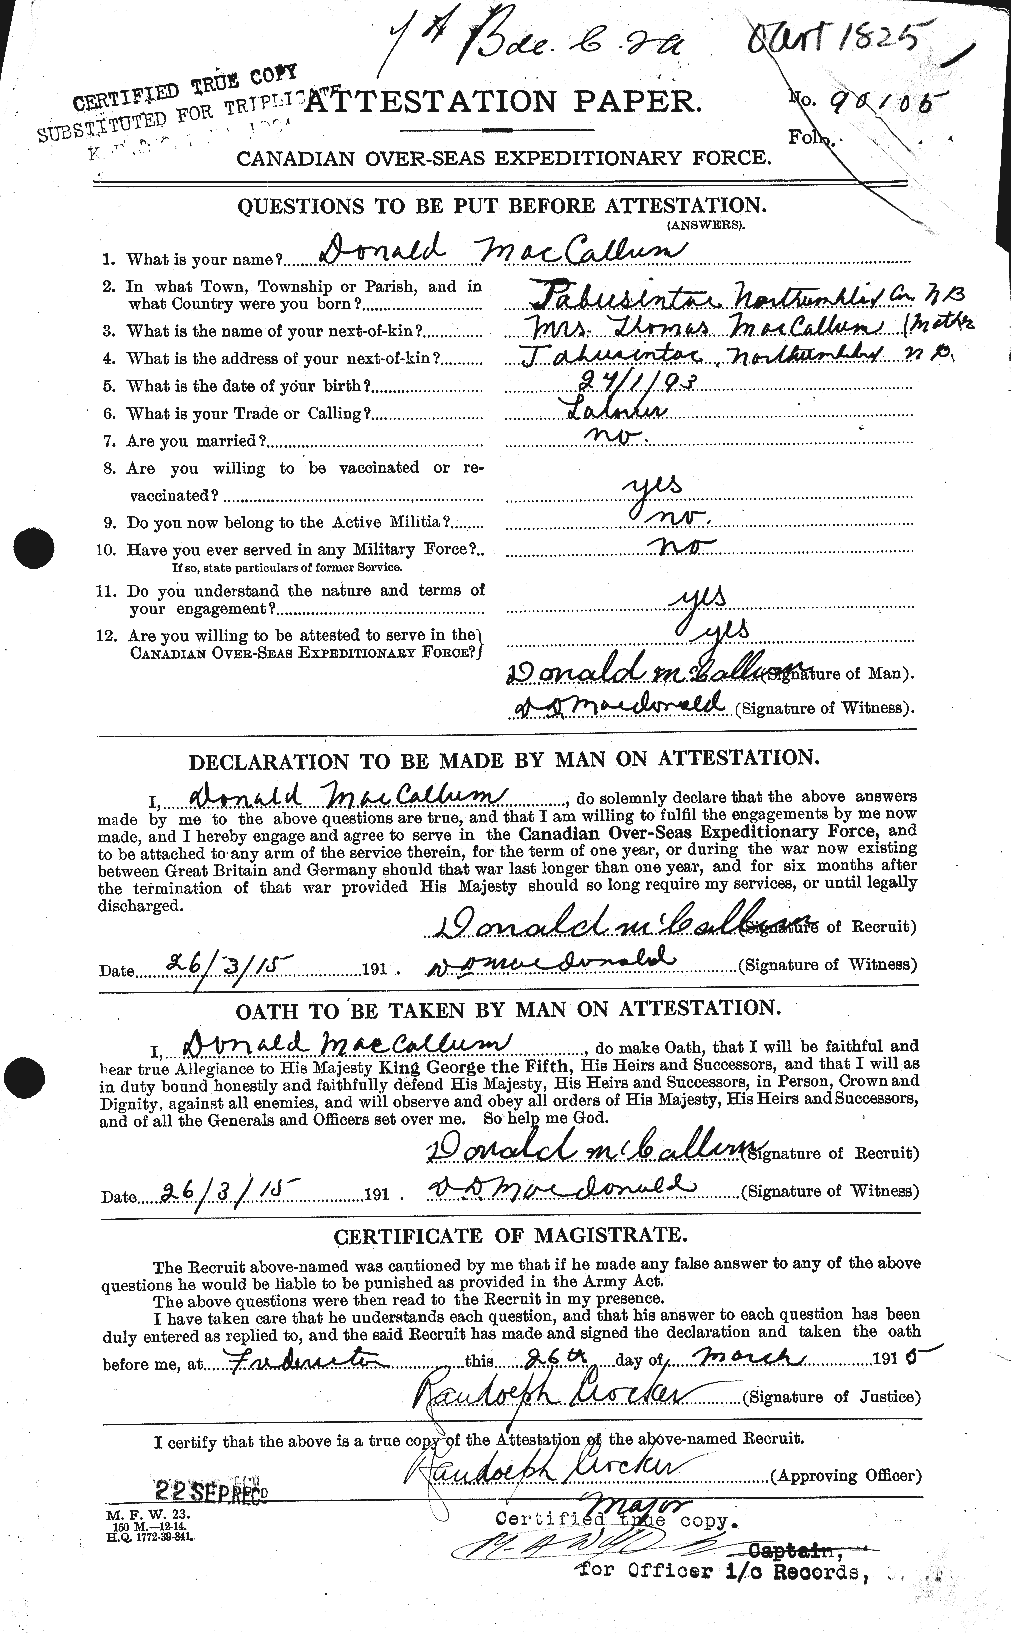 Personnel Records of the First World War - CEF 131637a